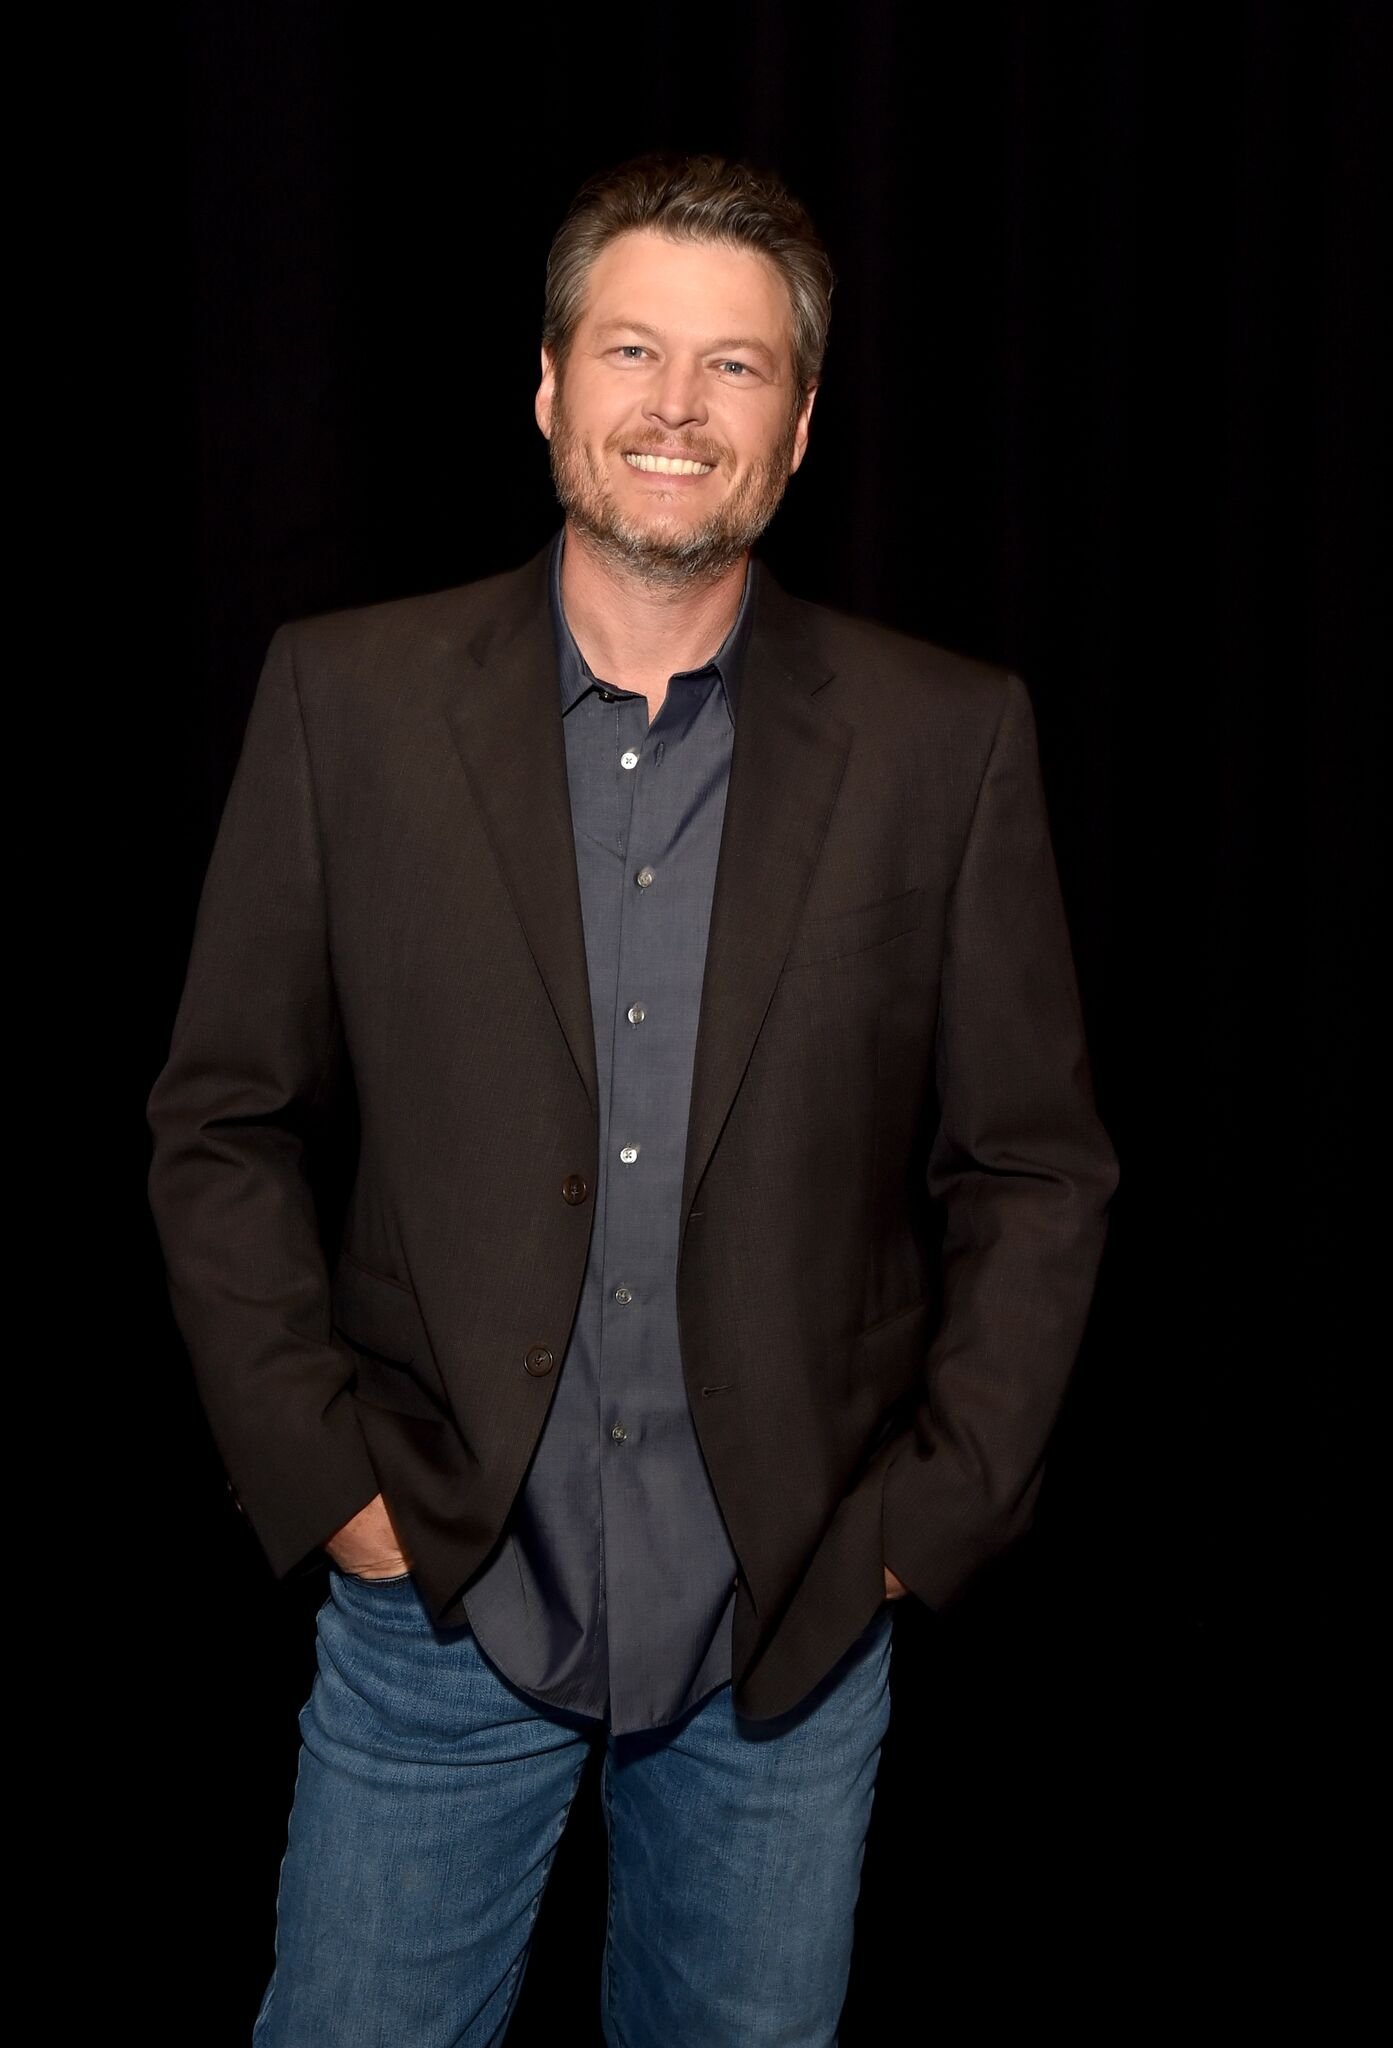  Blake Shelton poses for a photo during NBC's "The Voice"  | Getty Images